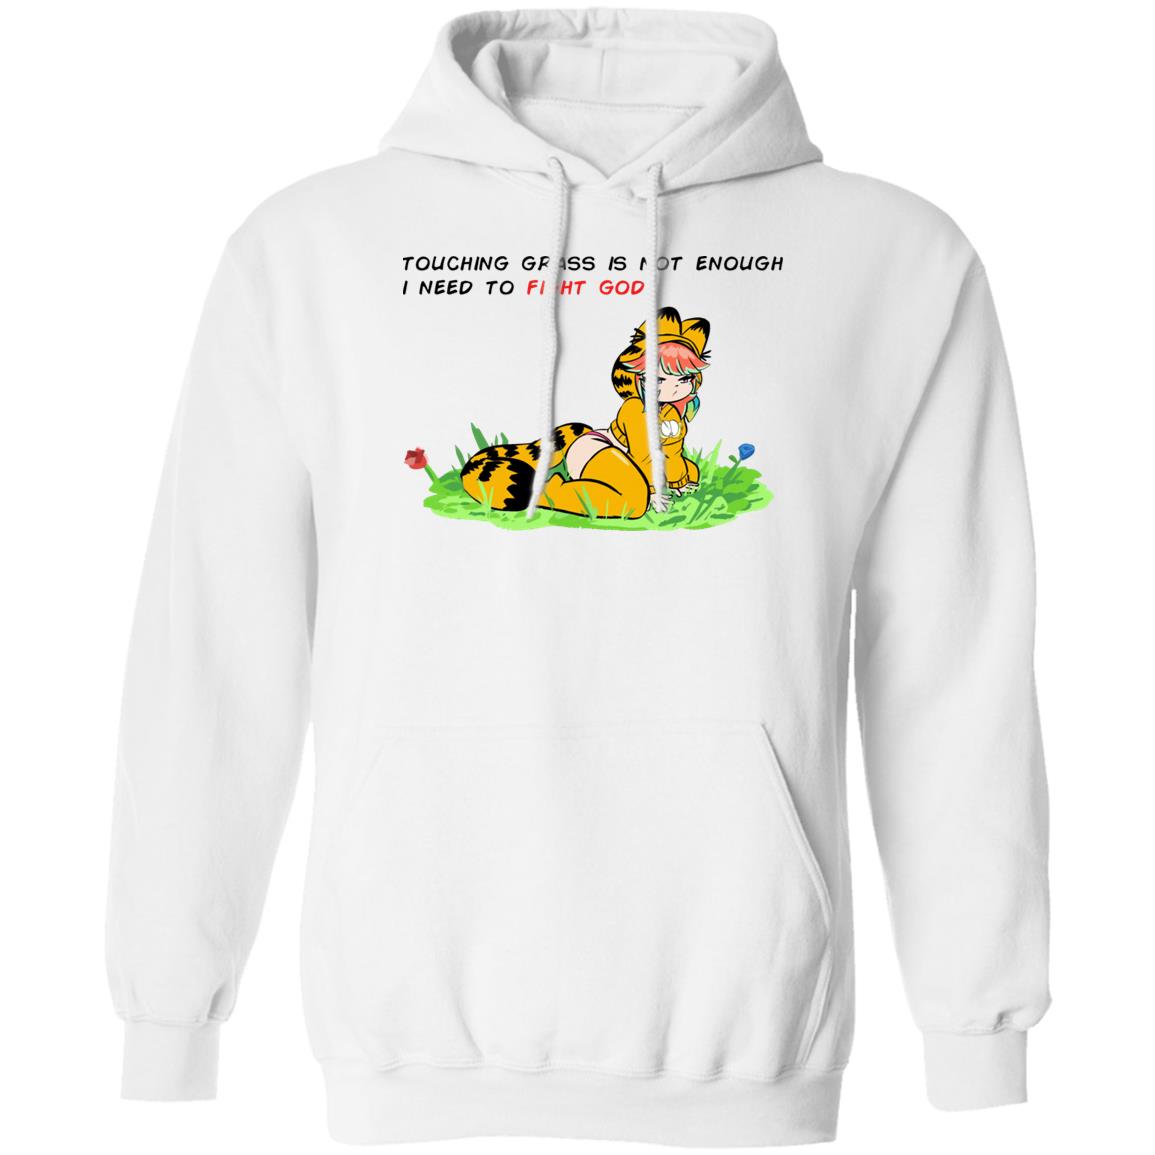 Touching Grass Is Not Enough I Need To Fight God Garfield Meme Shirt 2